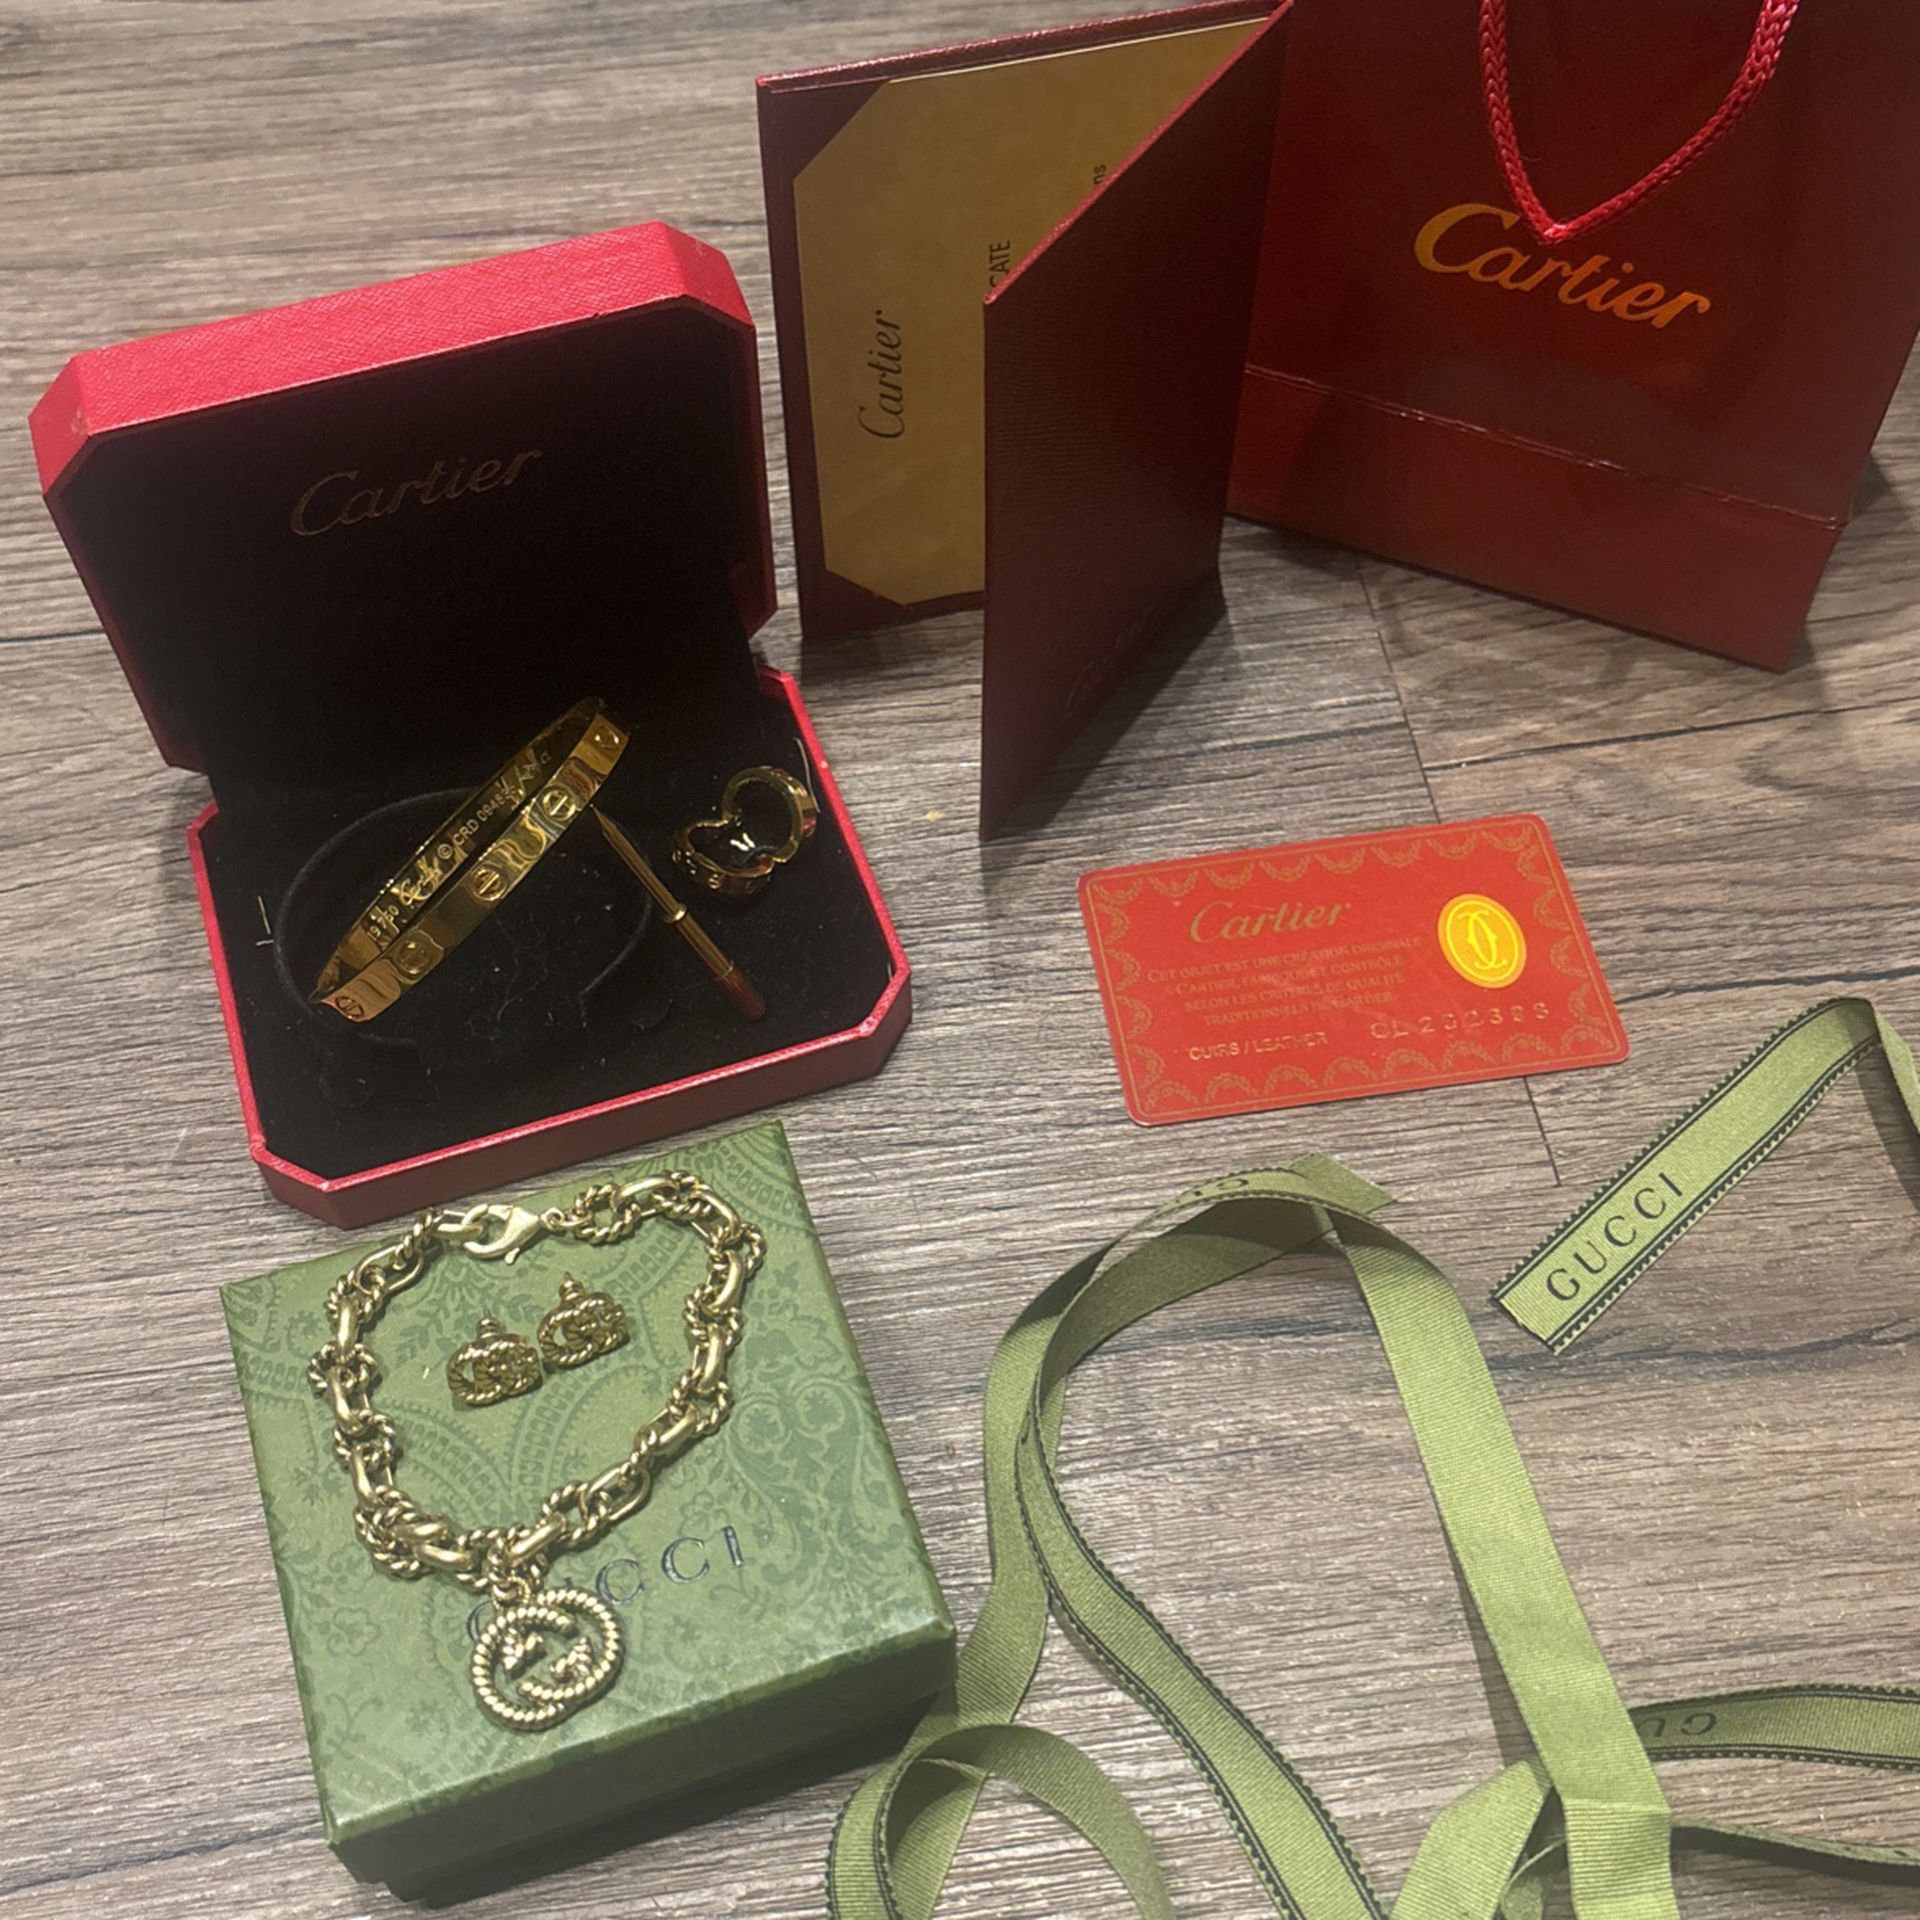 Cartier Women Set Jewelry  and Gucci Set . LV Bag Or Key Pendant